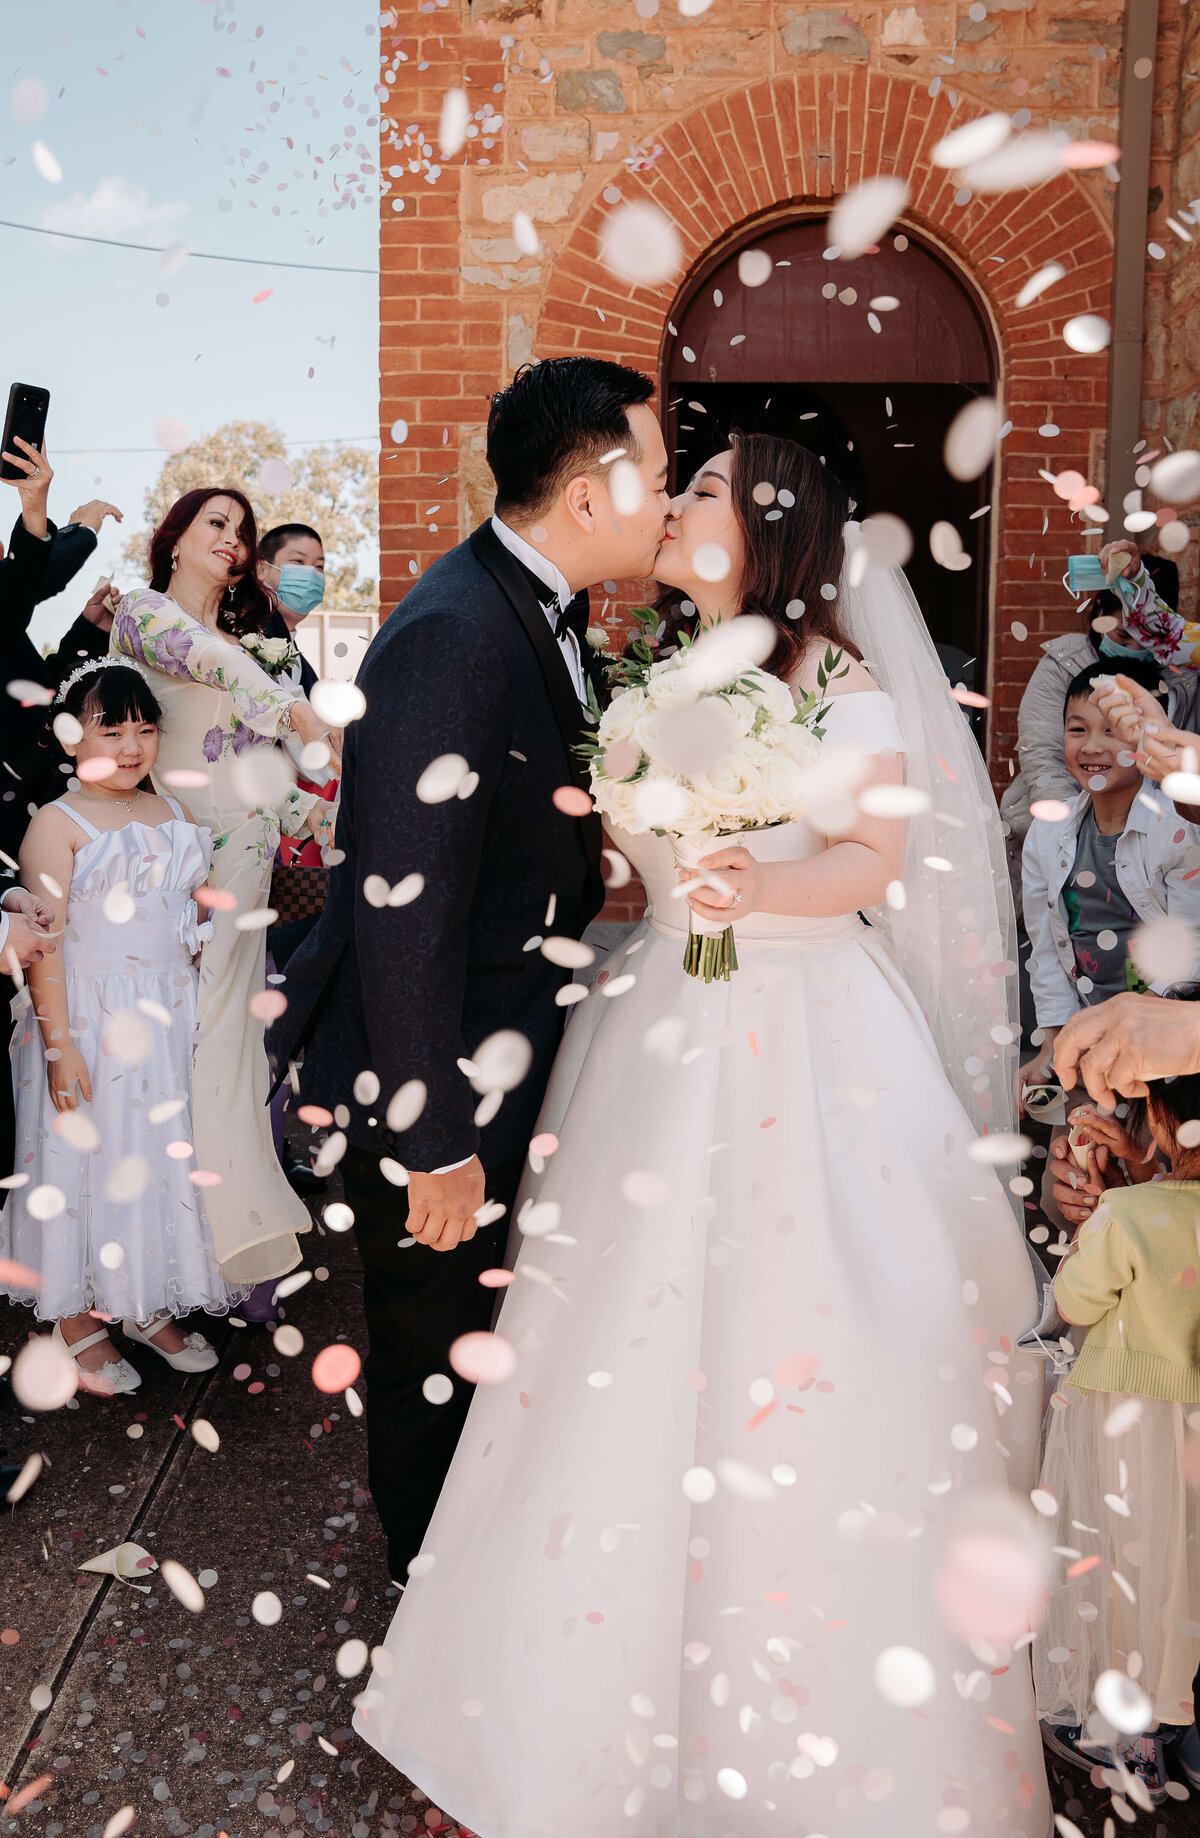 confetti toss at wedding in adelaide city